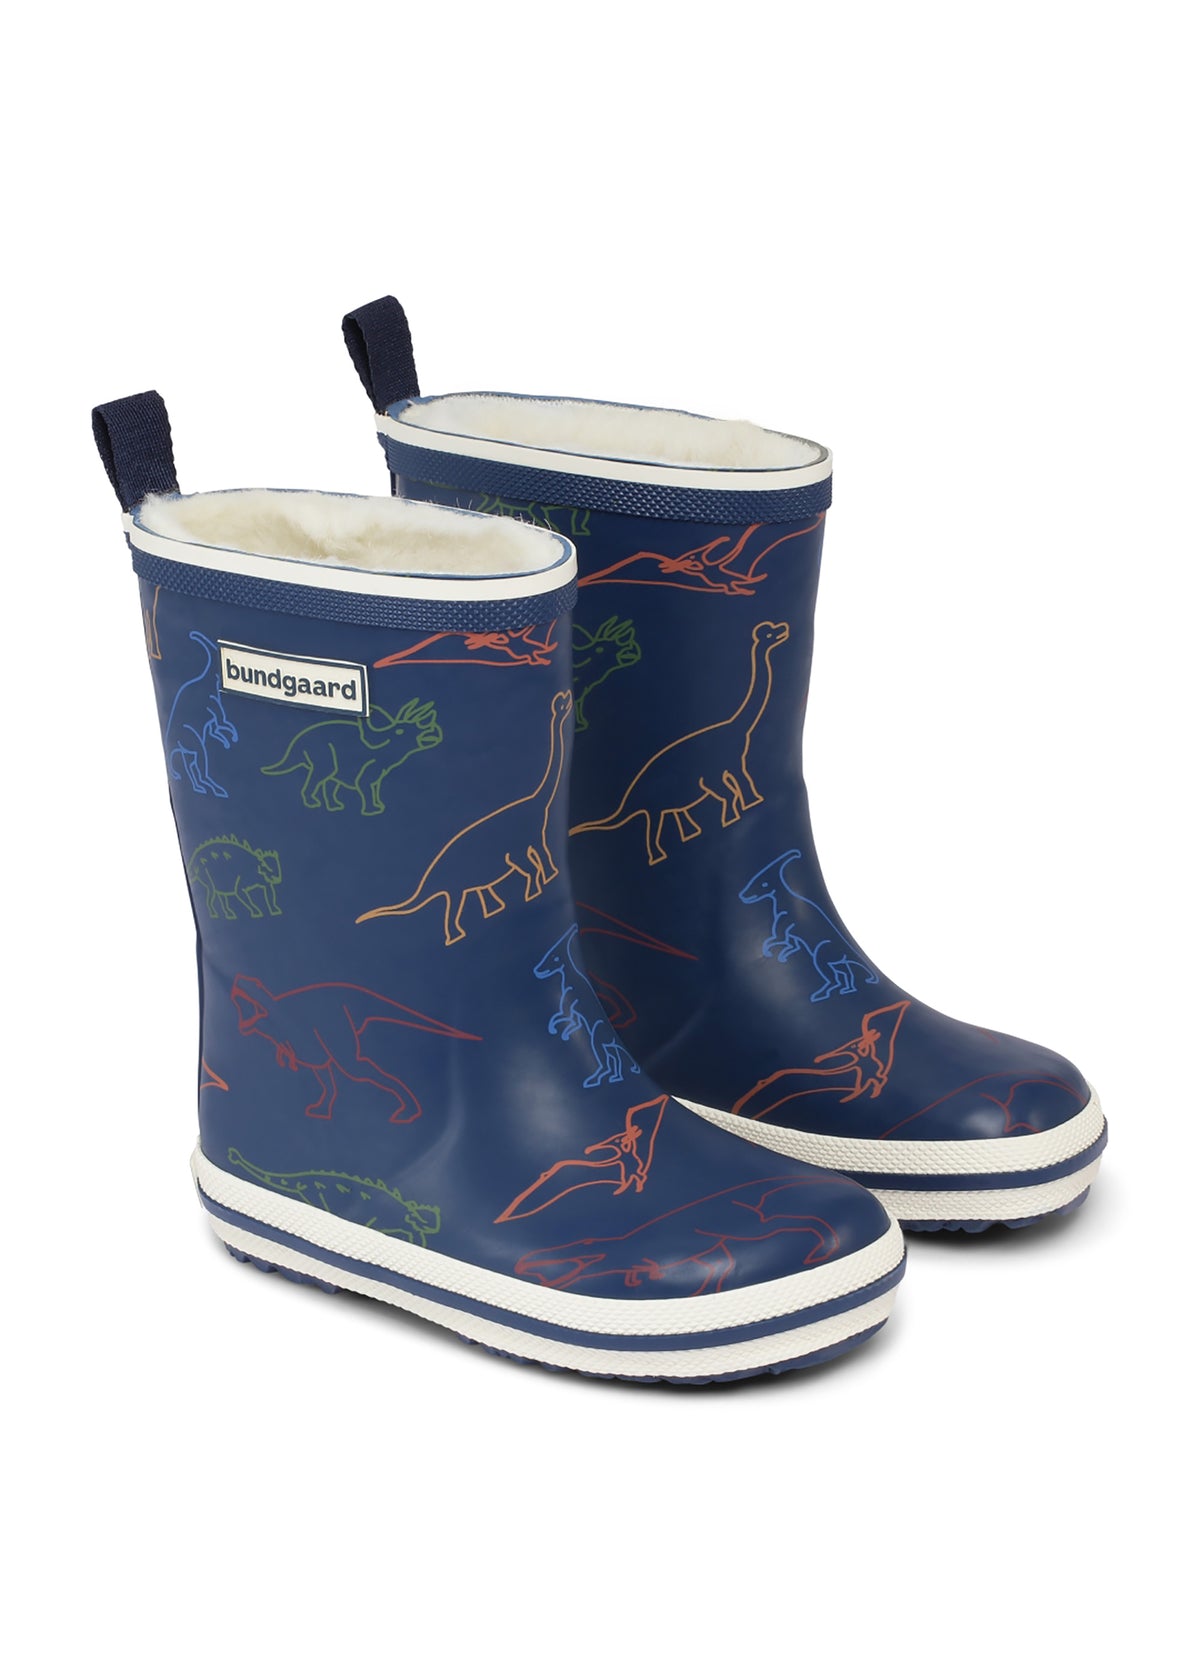 Rubber boots with a warm lining - blue, dinosaurs, Charly High Warm